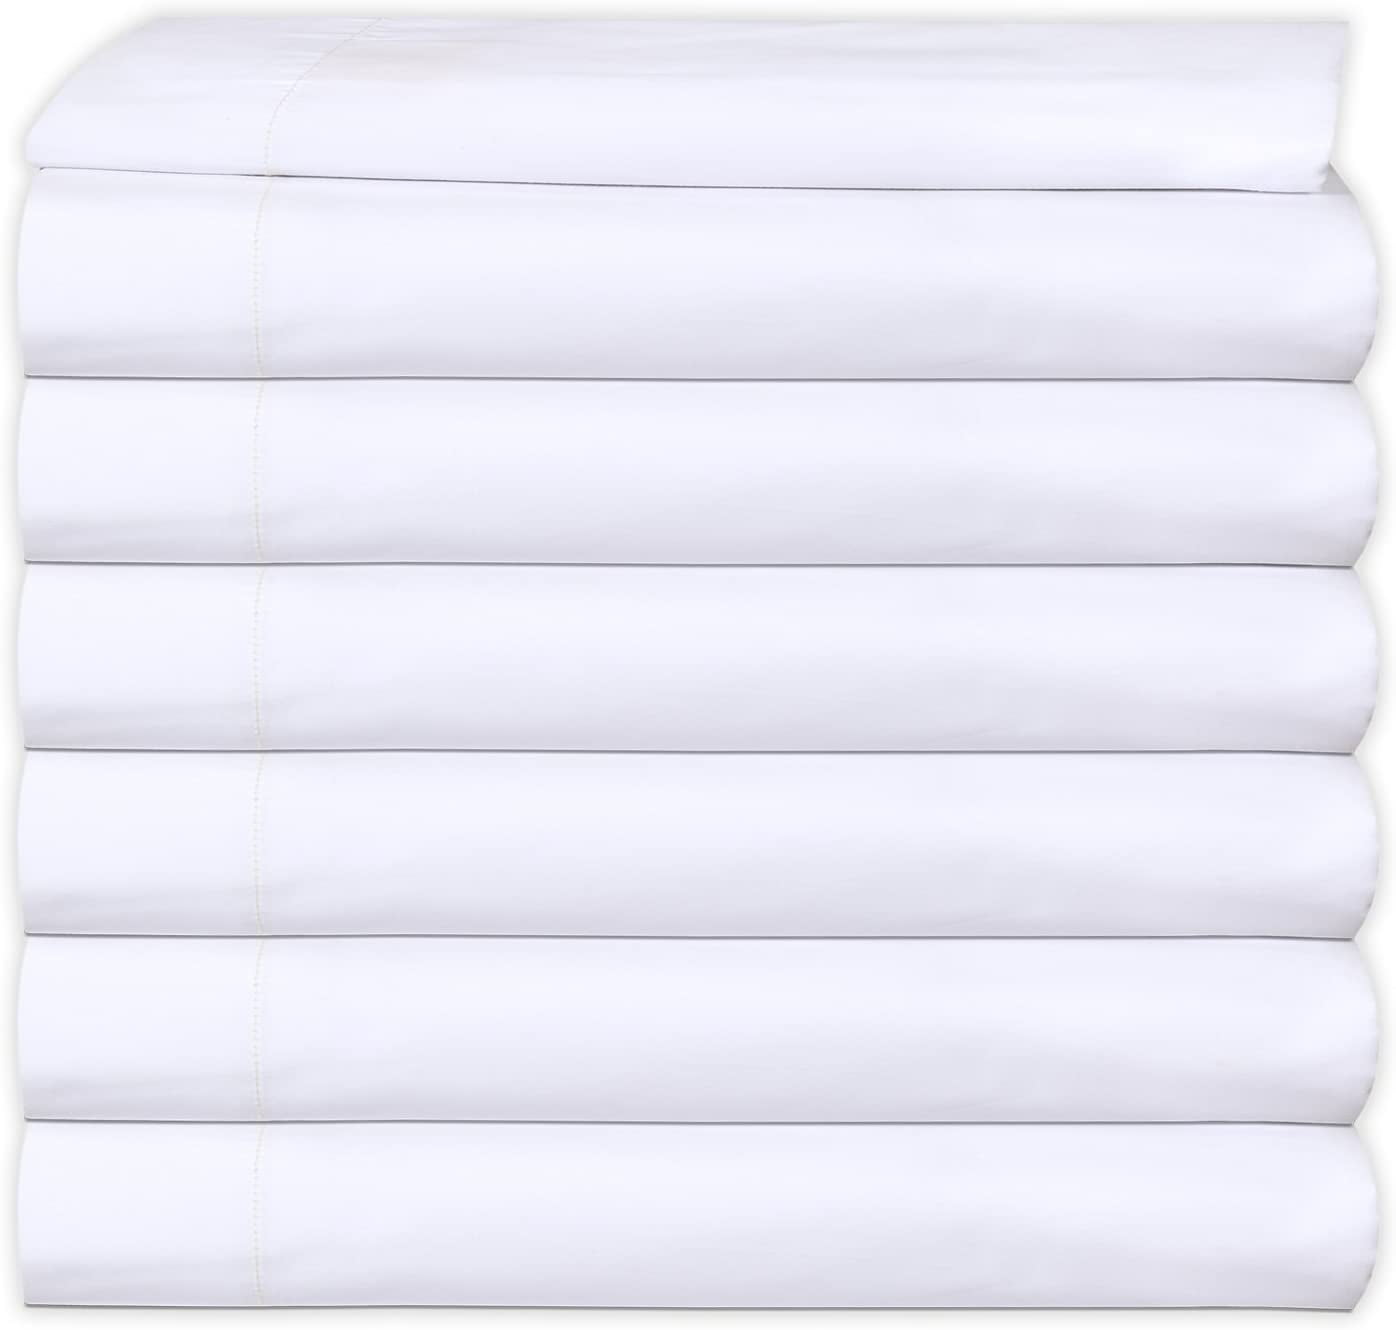  GOLD TEXTILES 6 Full Bulk Flat Sheet (81 x108) Inches White  T-200 Percale Hotel Linen Polycotton Flat Sheets - Top Sheet for Home  Bedding, Hospital, Hotel, Easy Care (6, Full Flat